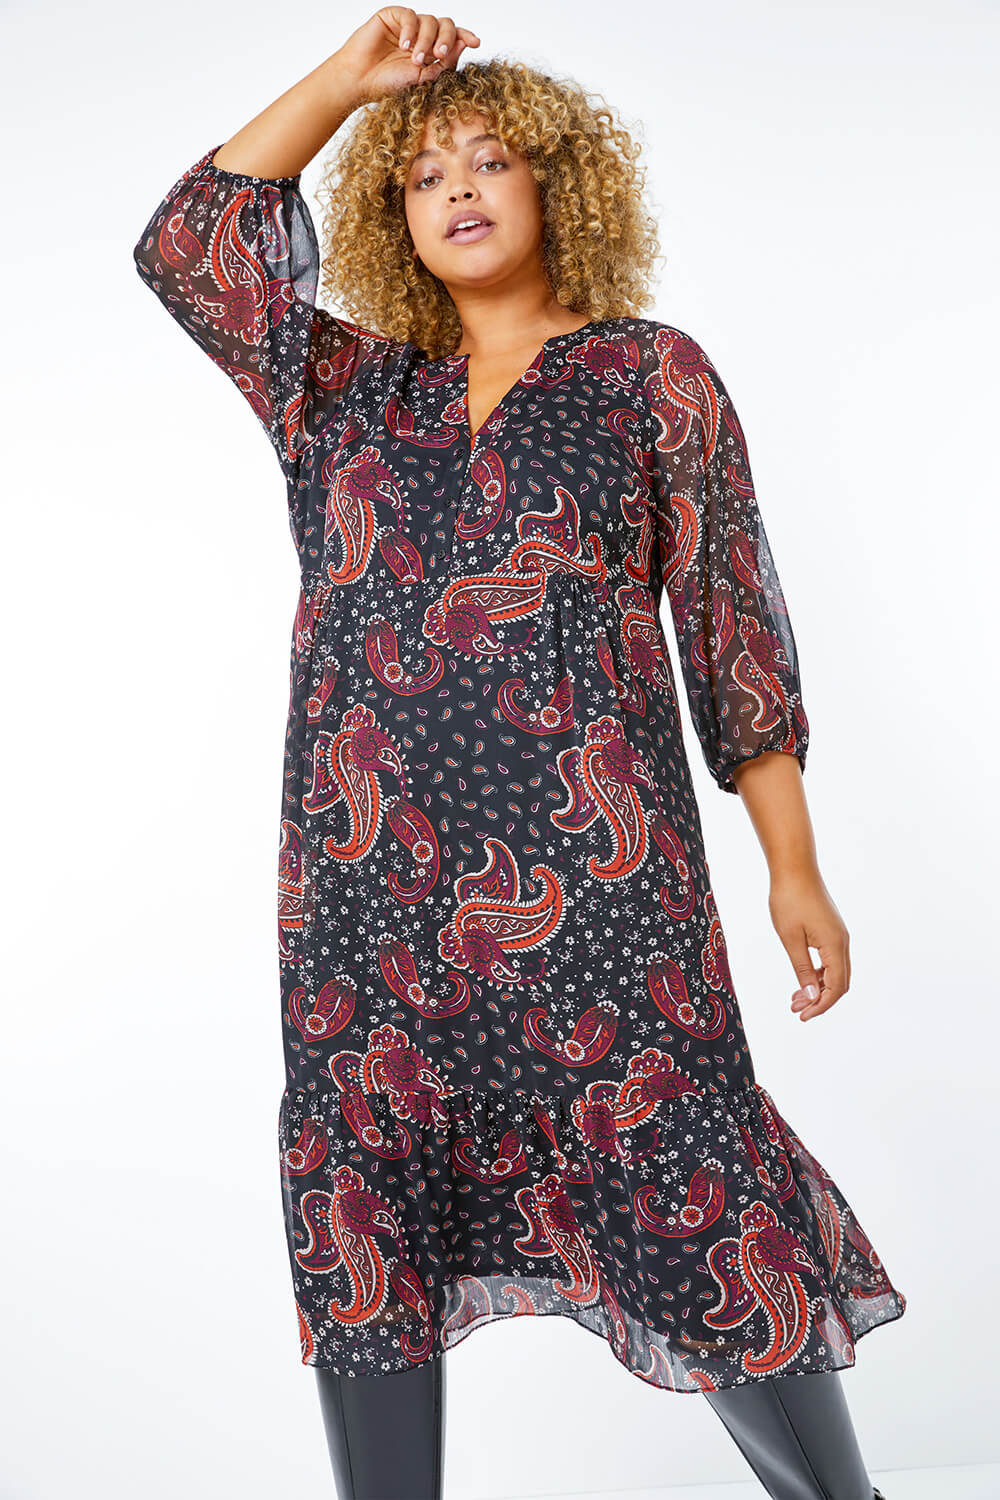 Black Curve Paisley Tiered Dress, Image 3 of 5